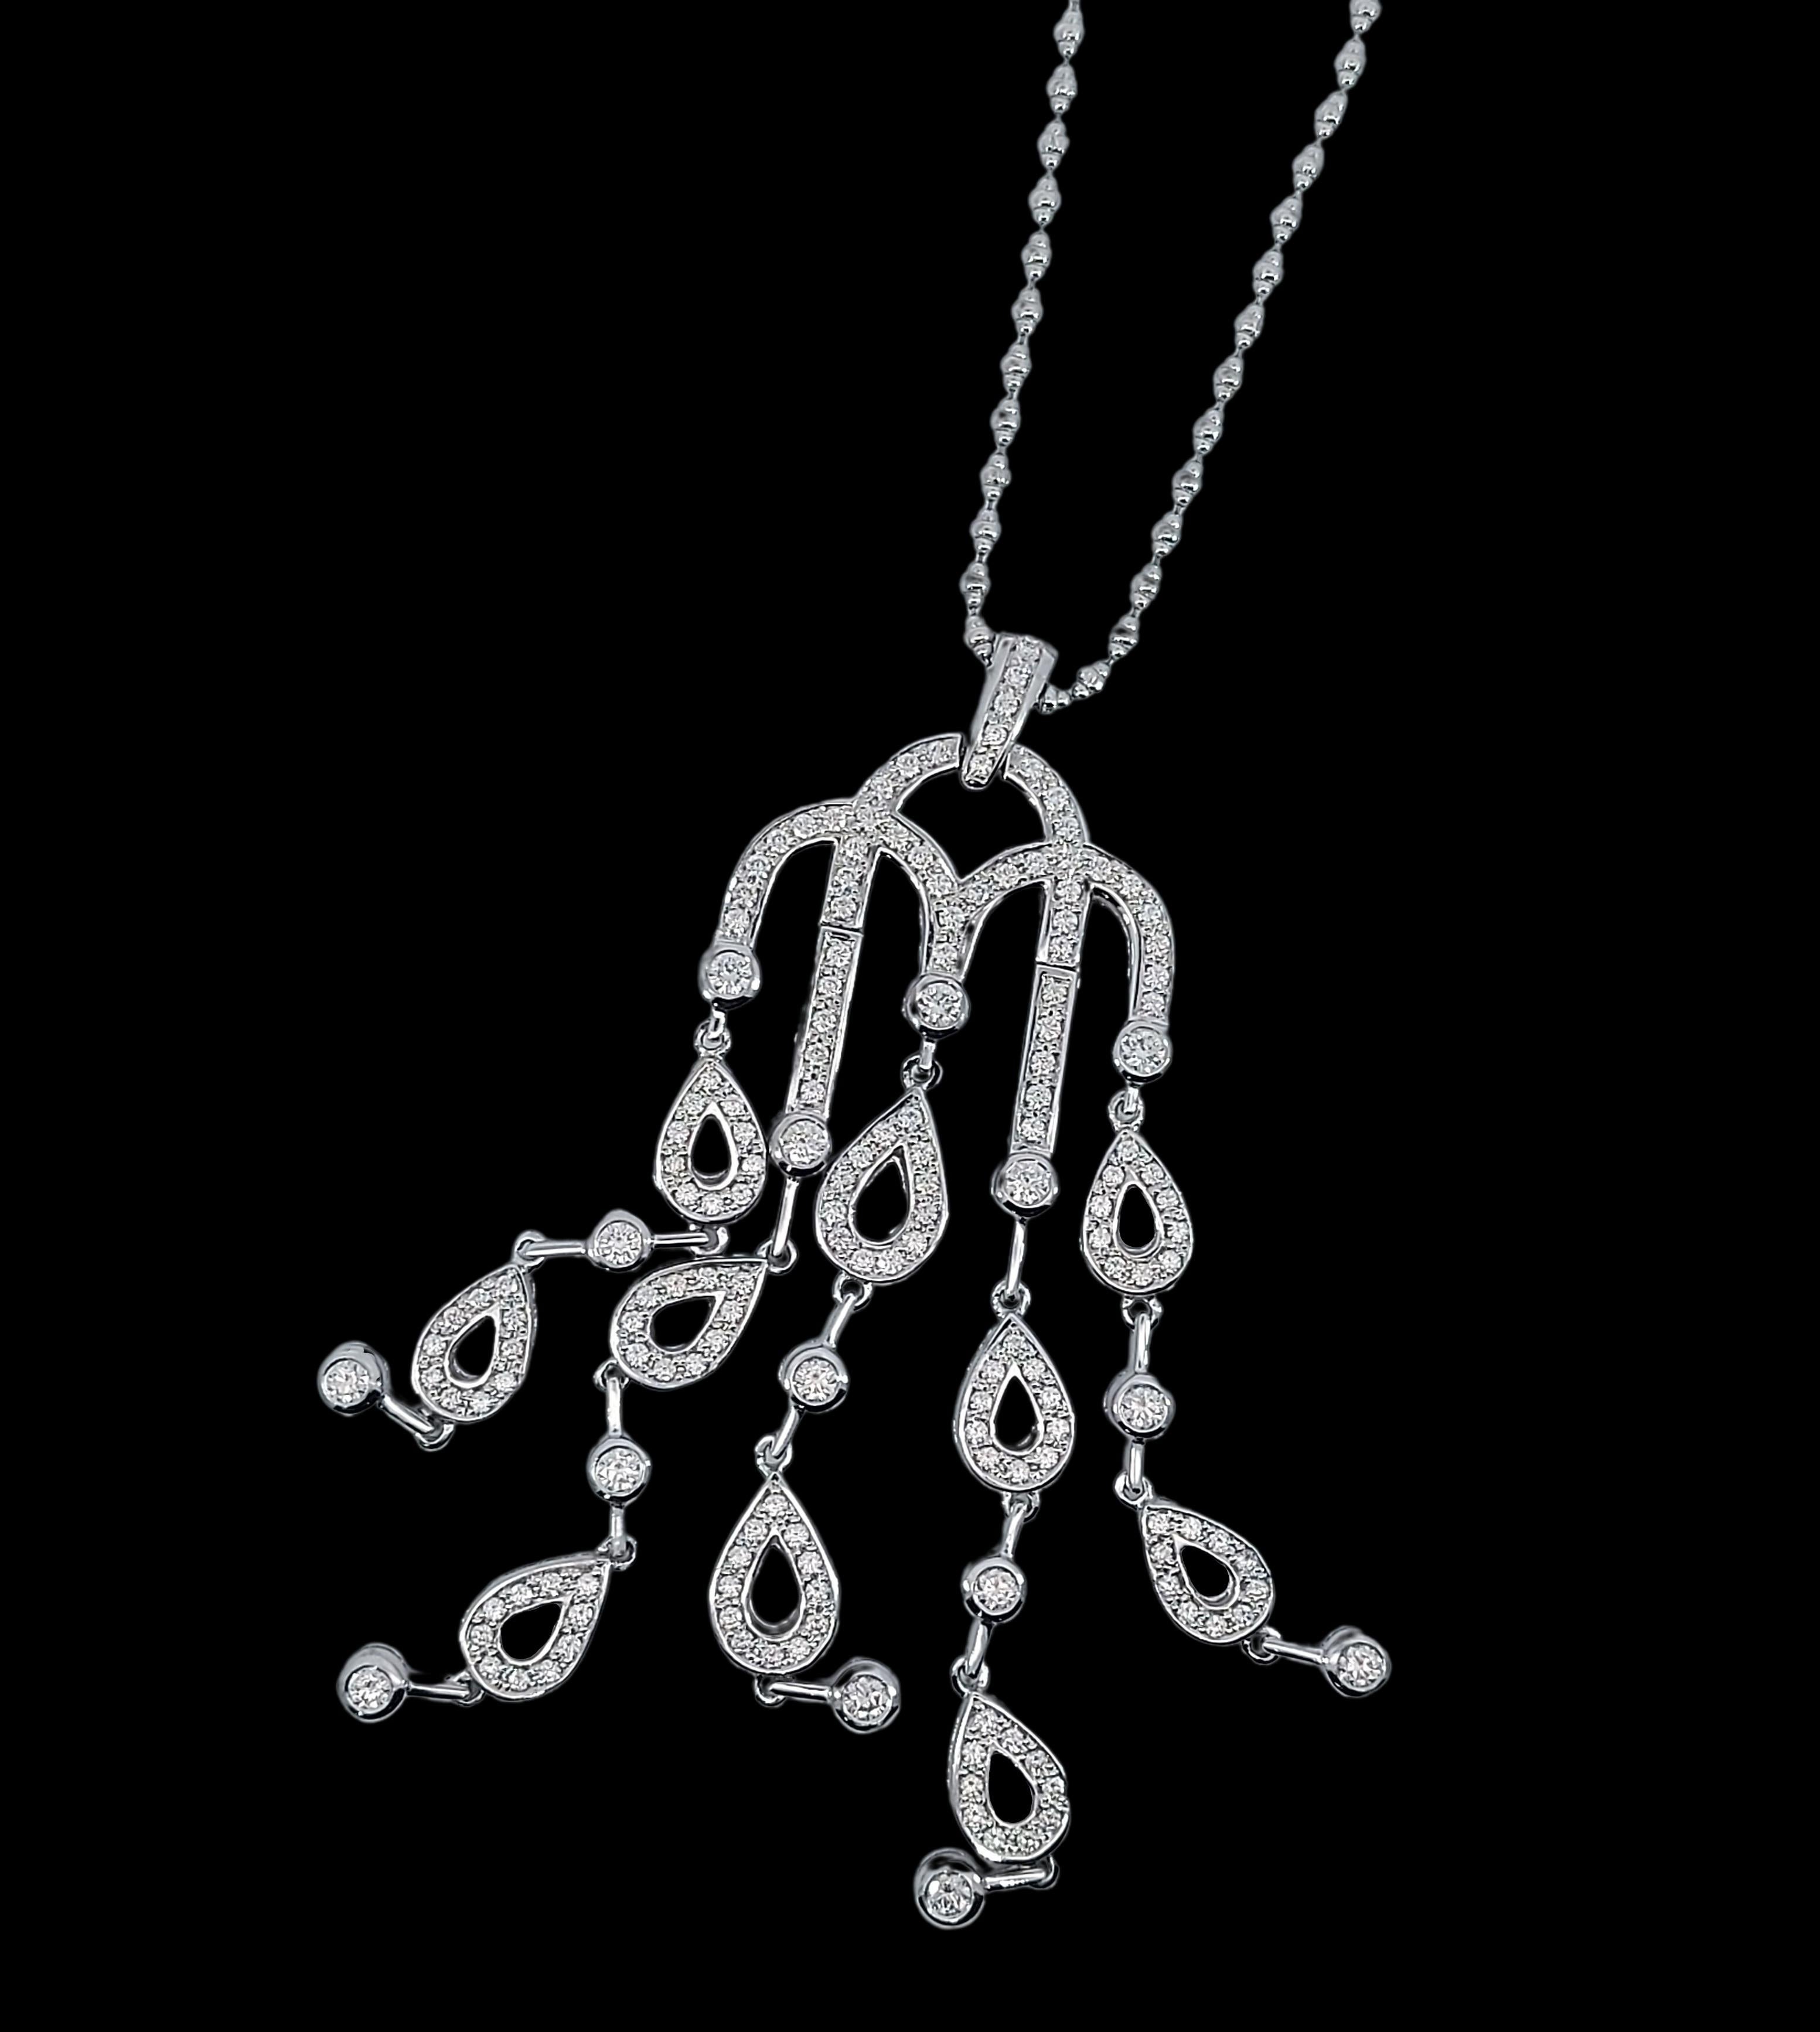 Dangling Chandelier 18kt White Gold Necklace with 5.4ct Diamonds For Sale 6